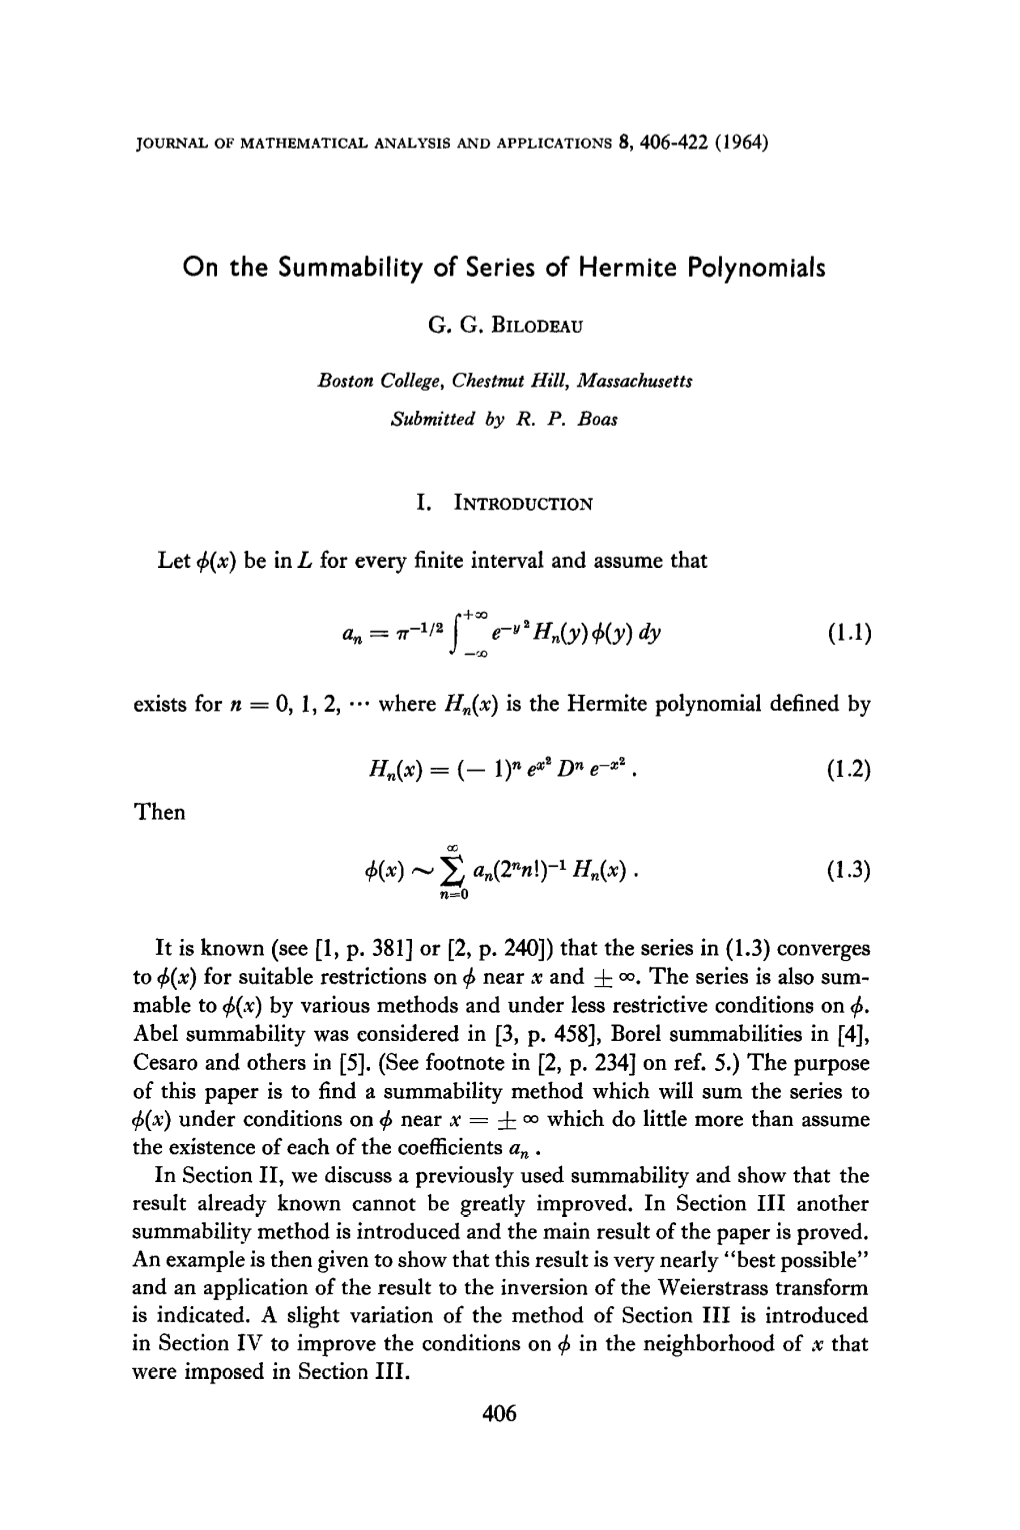 On the Summability of Series of Hermite Polynomials